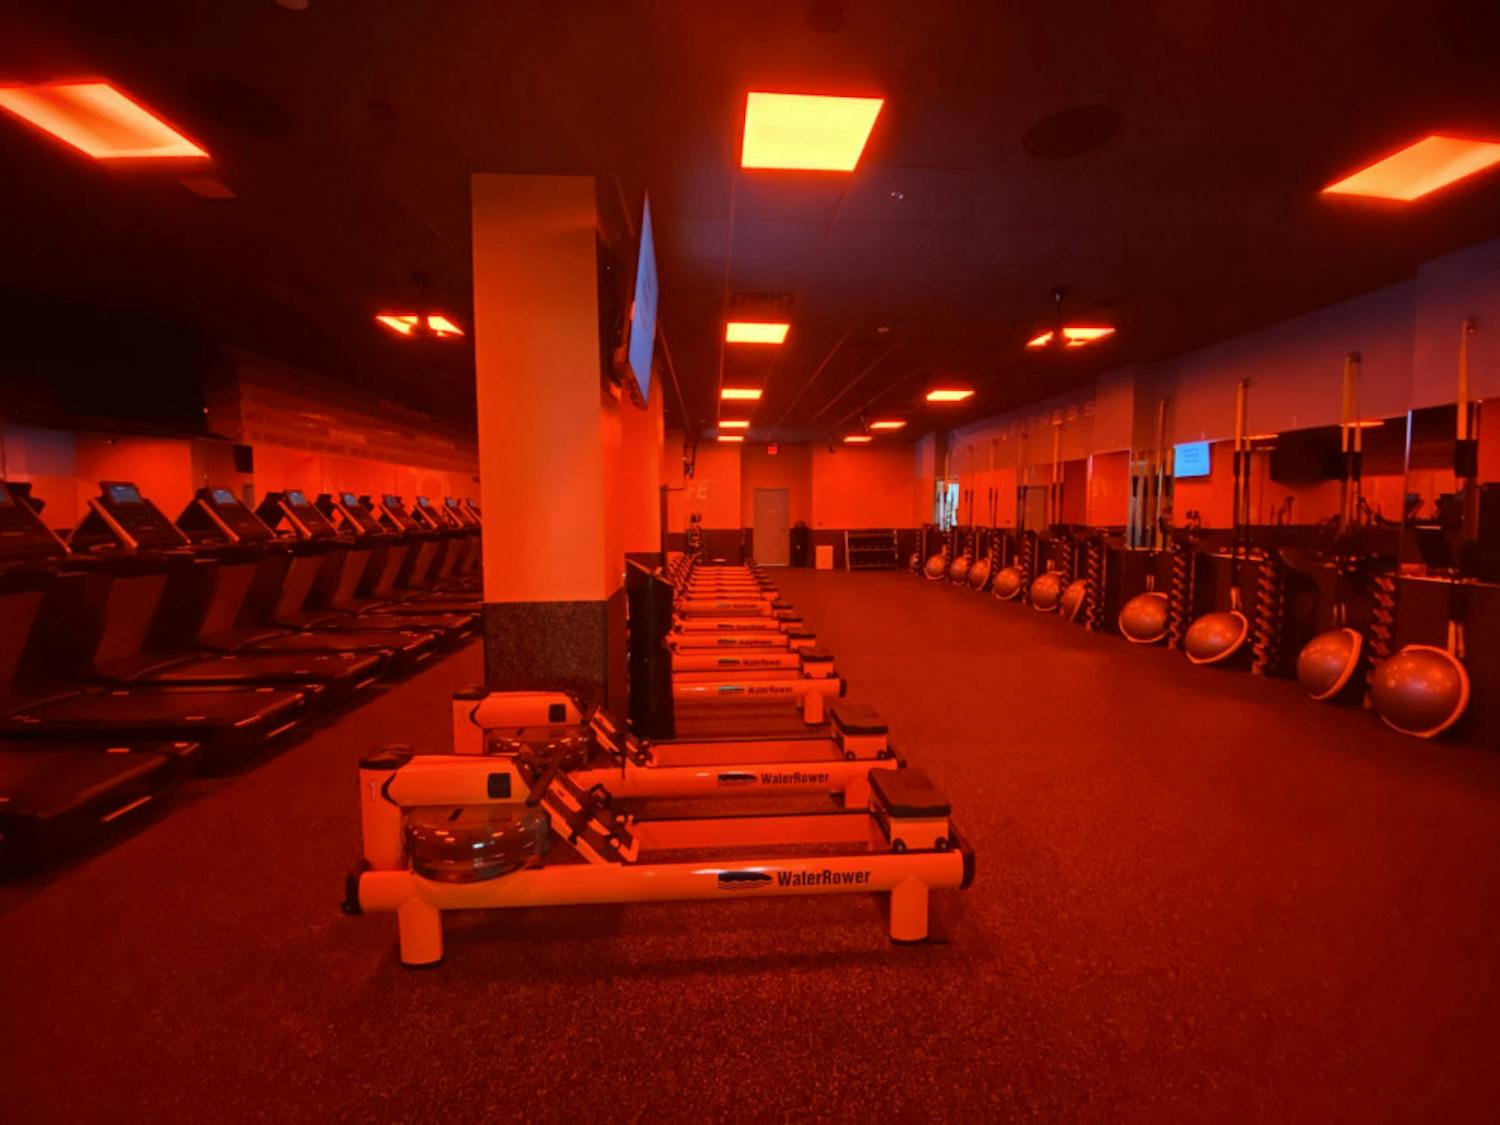 The new Orangetheory fitness location will hold its Grand Opening Party today from 4:30 to 6:30 p.m.